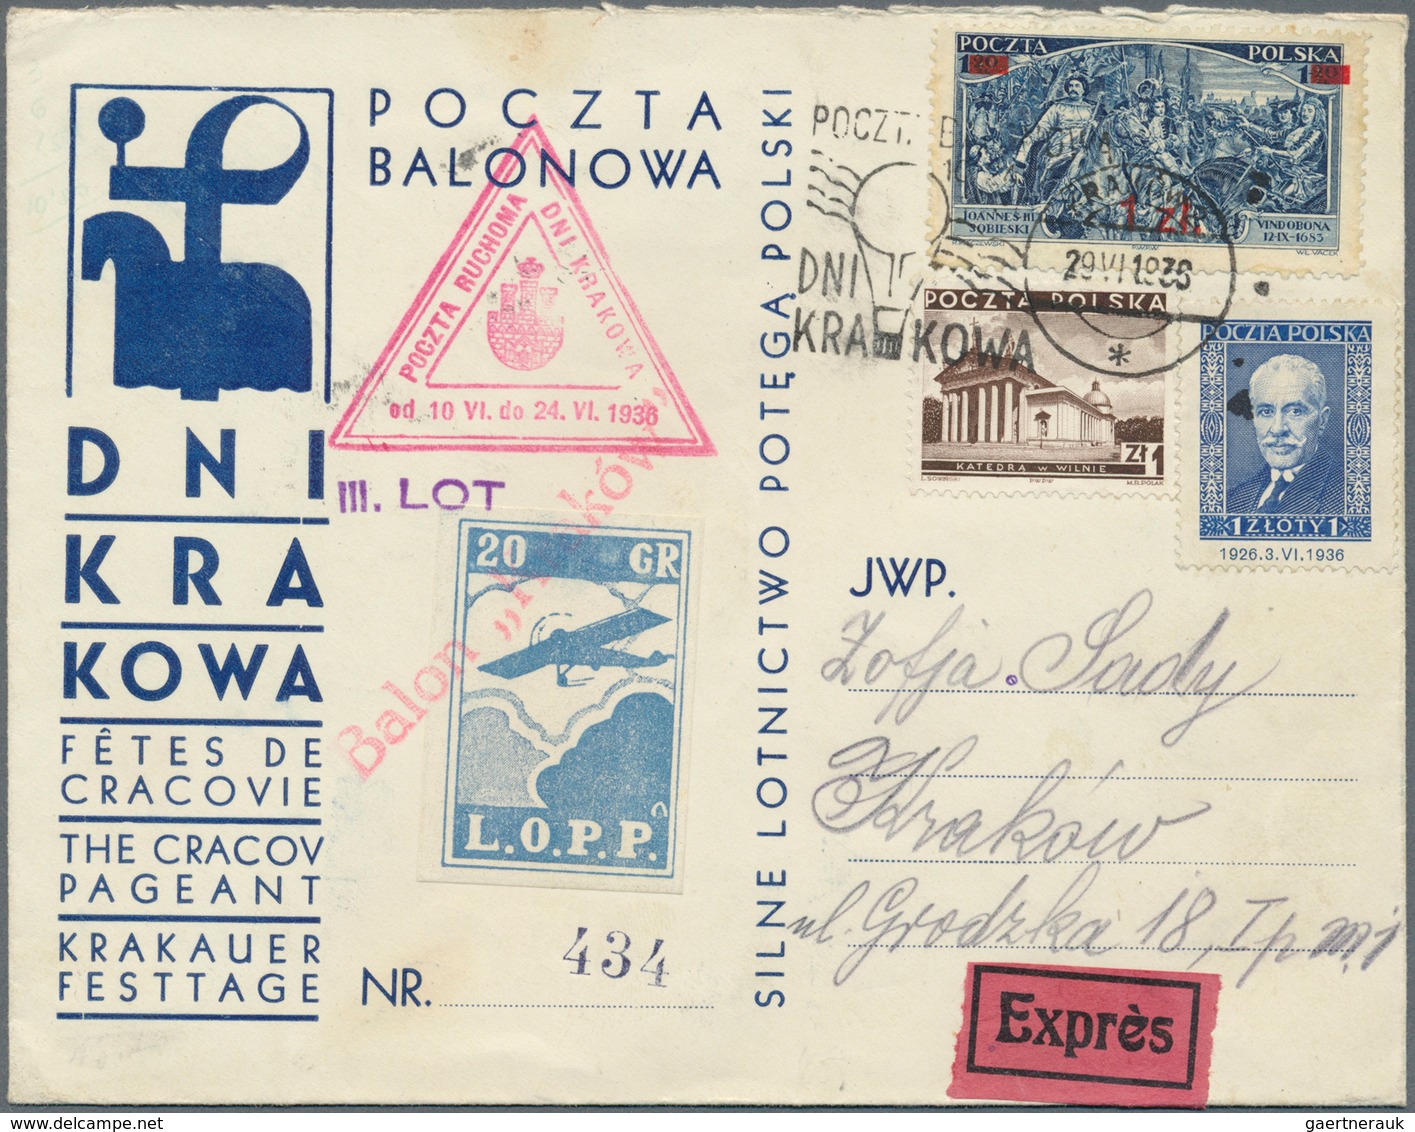 12817 Ballonpost: 1936, 29.VI., Poland, balloon "Kraków", 1st-3rd flight, four covers/card showing all cac